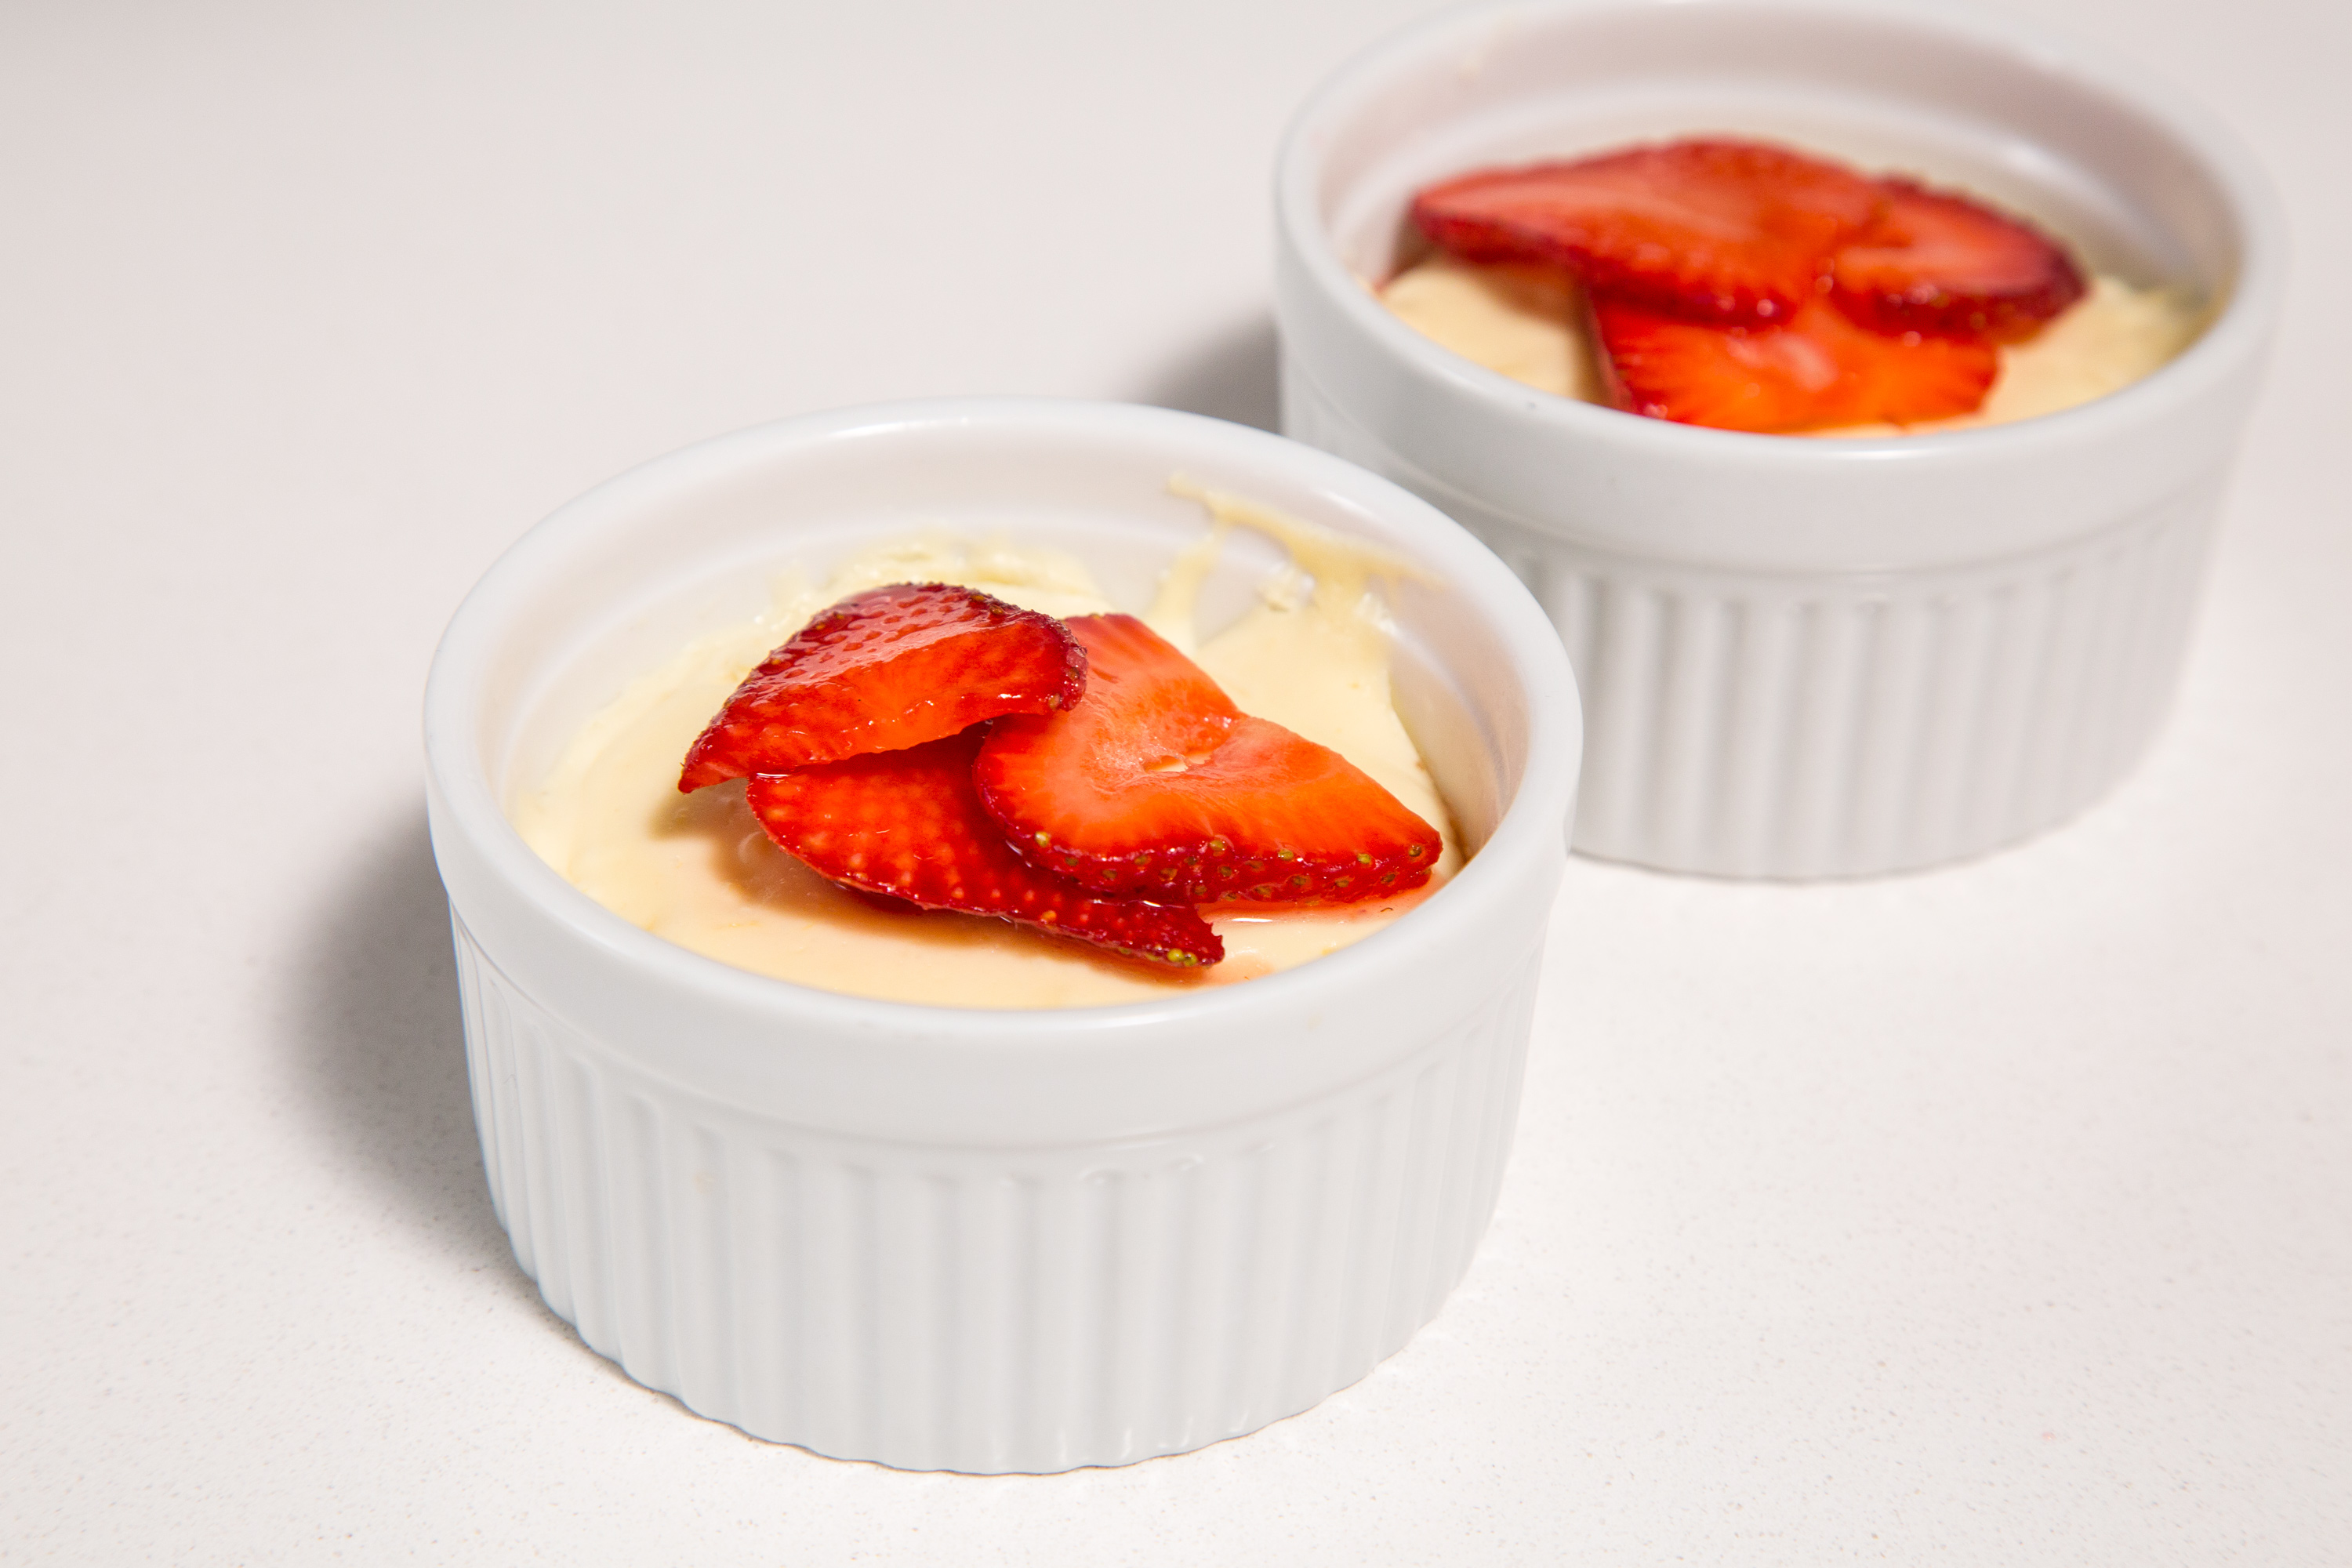 https://img.sunset02.com/sites/default/files/instant-pot-cheesecake-for-two-su.jpg